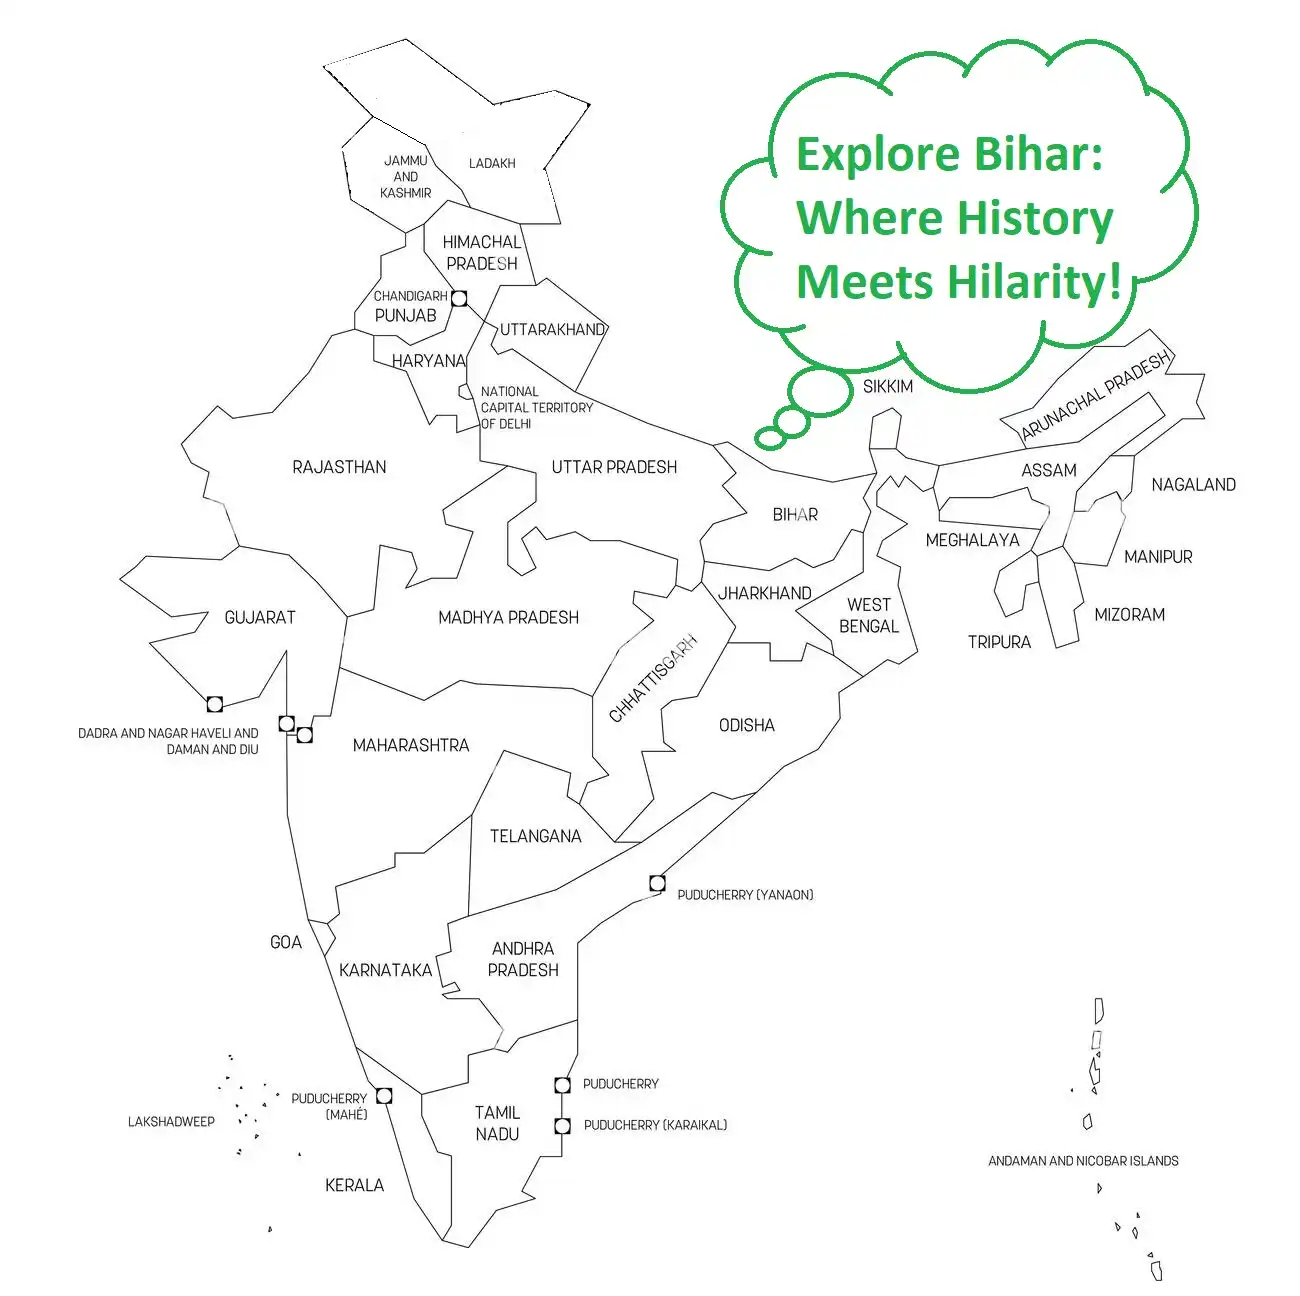 Historic journey of Bihar: A Tale of Resilience and Progress